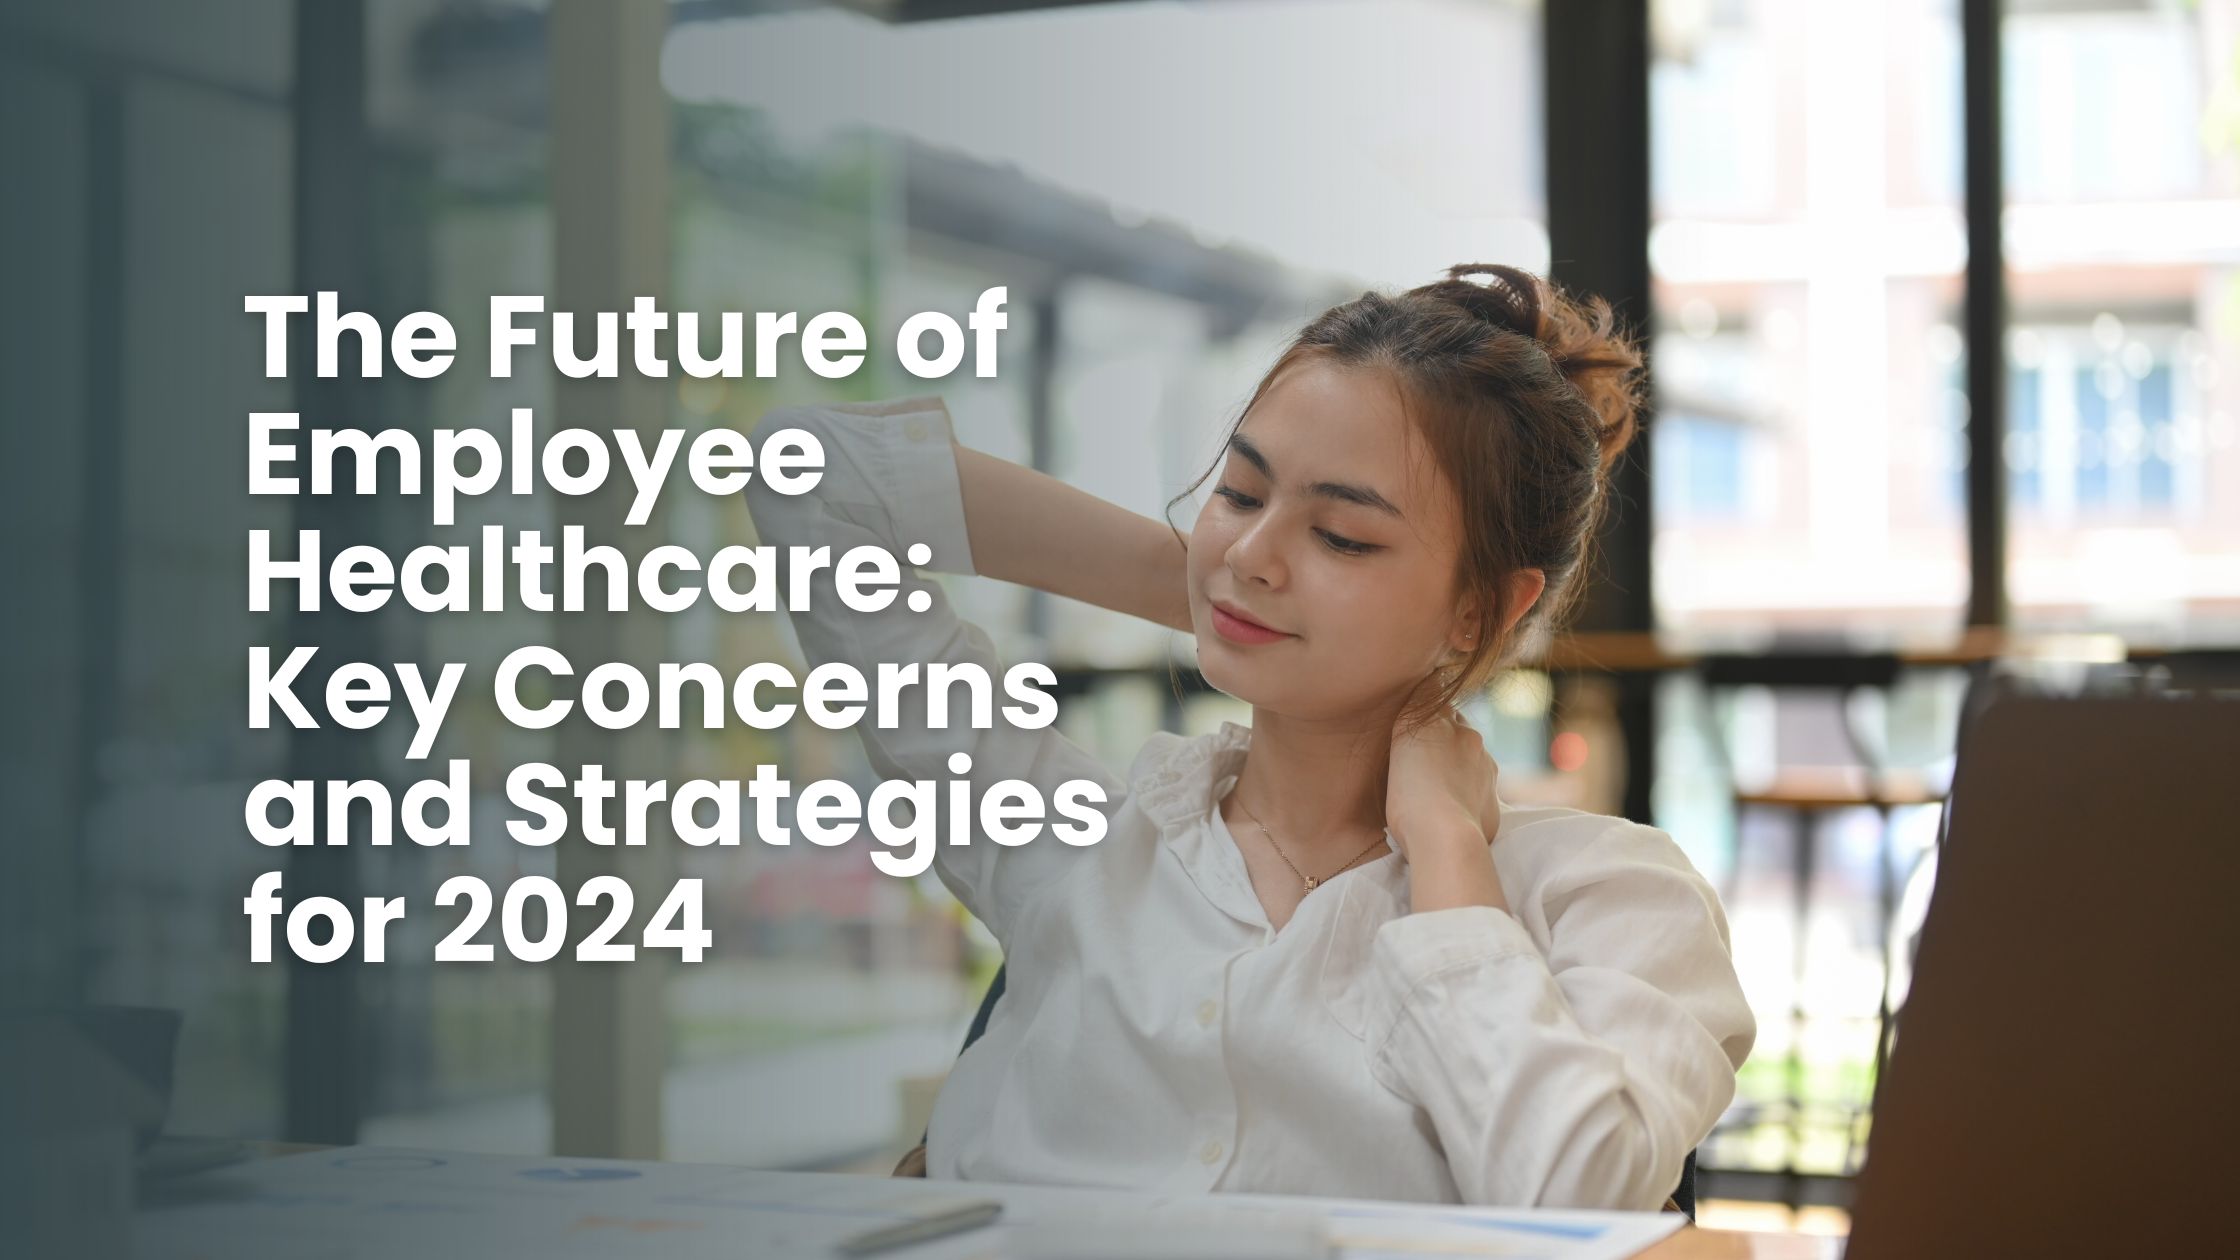 The Future of Employee Healthcare Key Concerns and Strategies for 2024